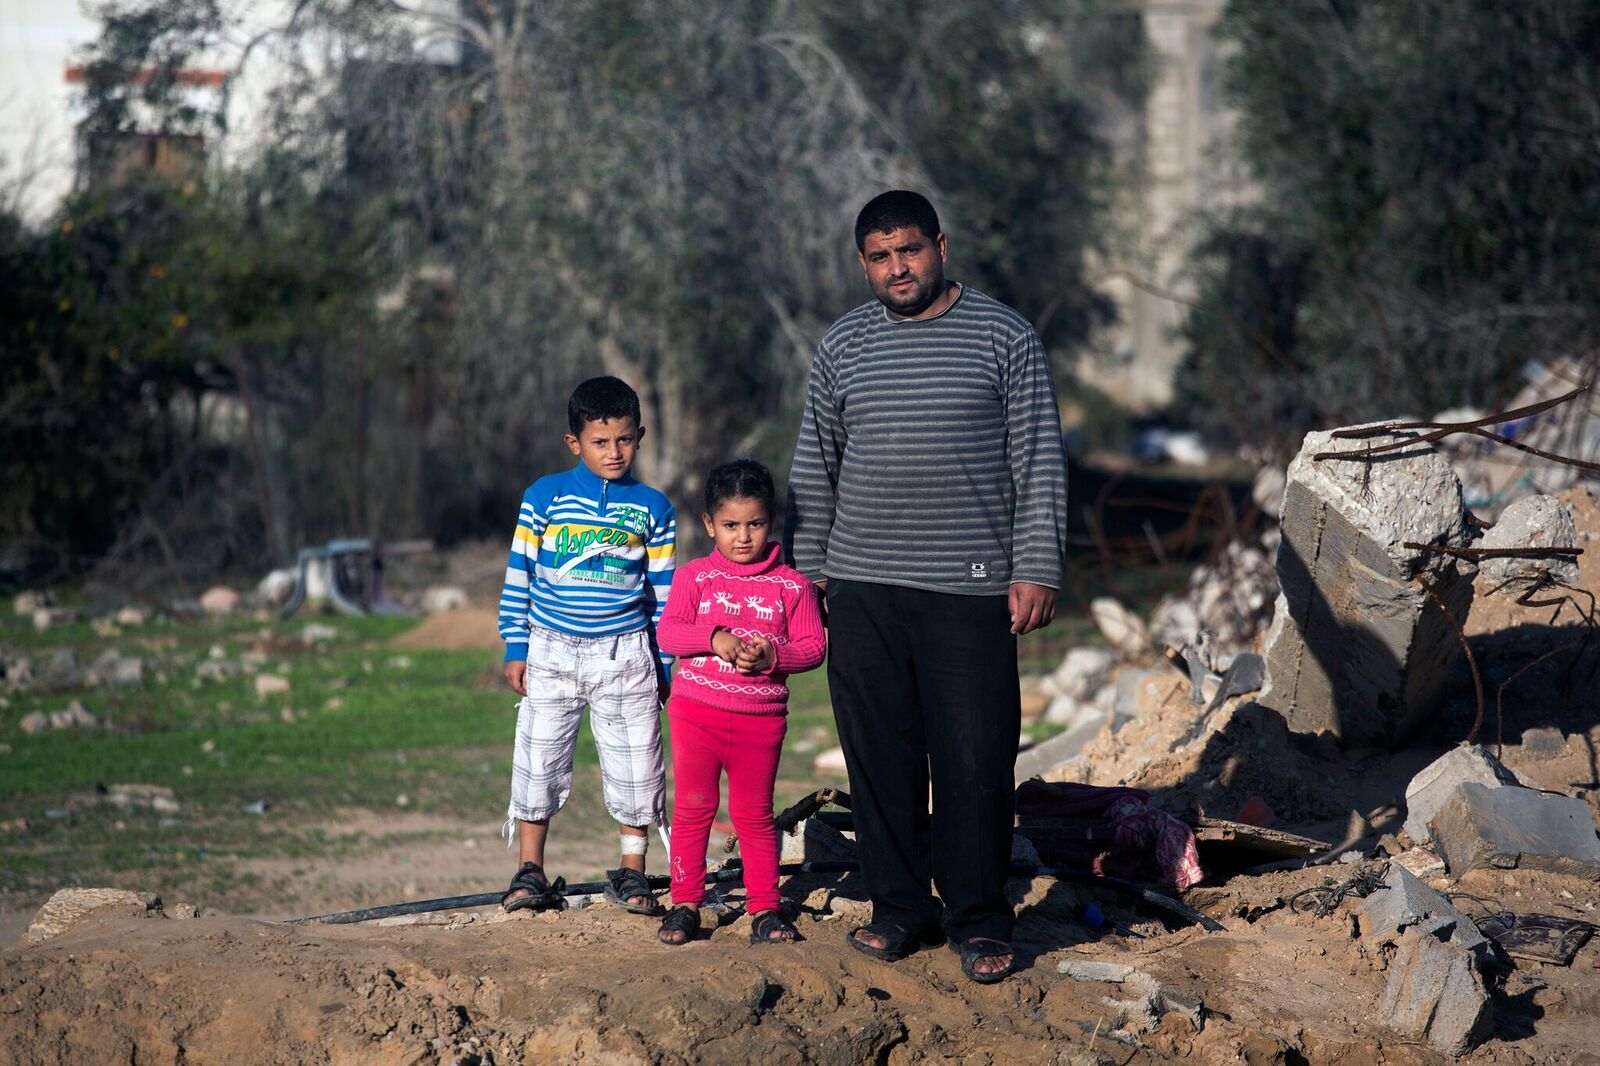 Hussein, one of the only three people to survive bombing of his family home, with his two children Husam and Olfat.
